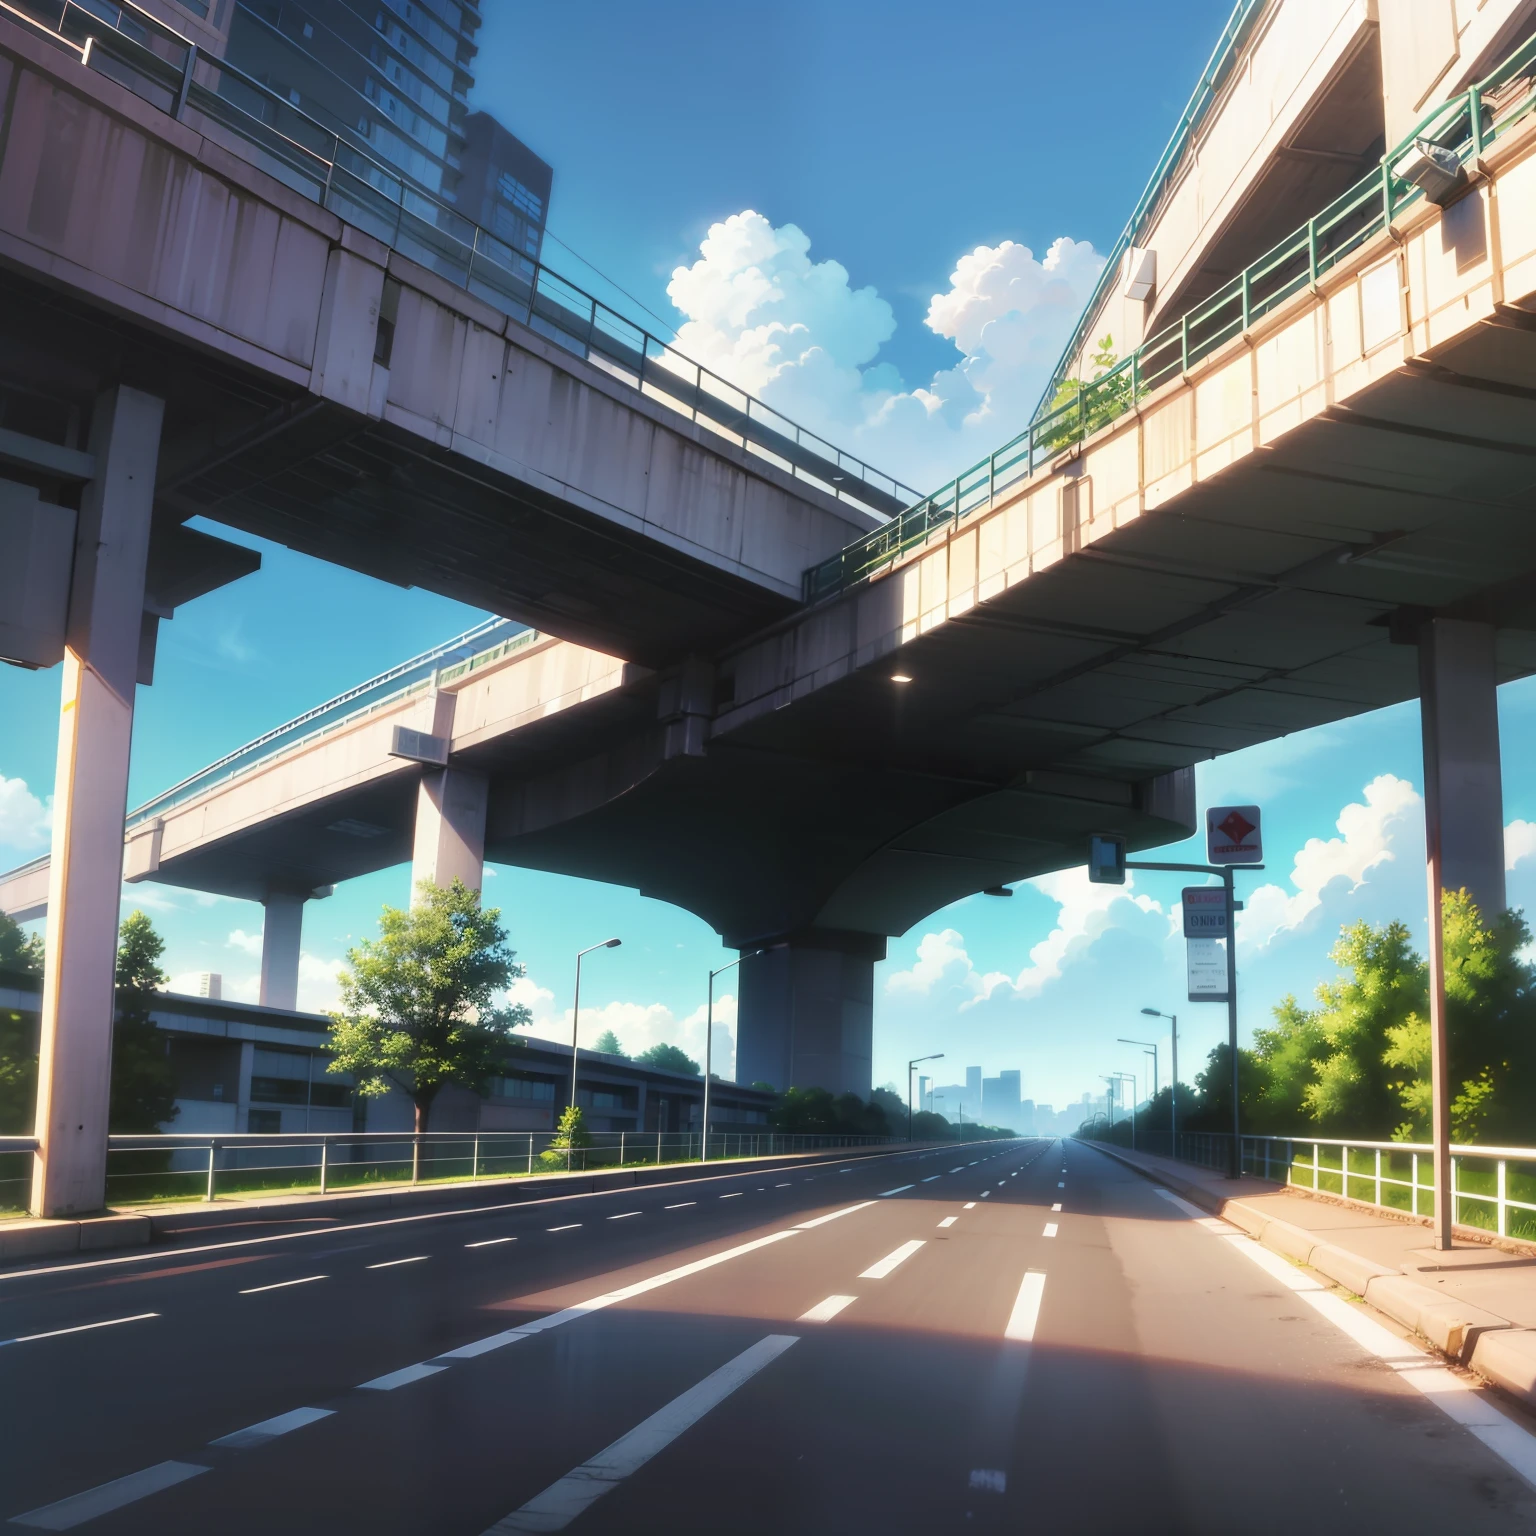 Generate an anime-style artwork featuring a low-angle view of a highway and an overpass. The perspective should be from ground level, as if the camera is positioned on the road itself. The scene should showcase a highway with cars passing by and an elevated walkway in the background. Beyond the highway, there should be a cityscape with tall buildings, depicting an urban setting just outside the city limits. The image should be in high definition, capturing the intricate details of the scene.